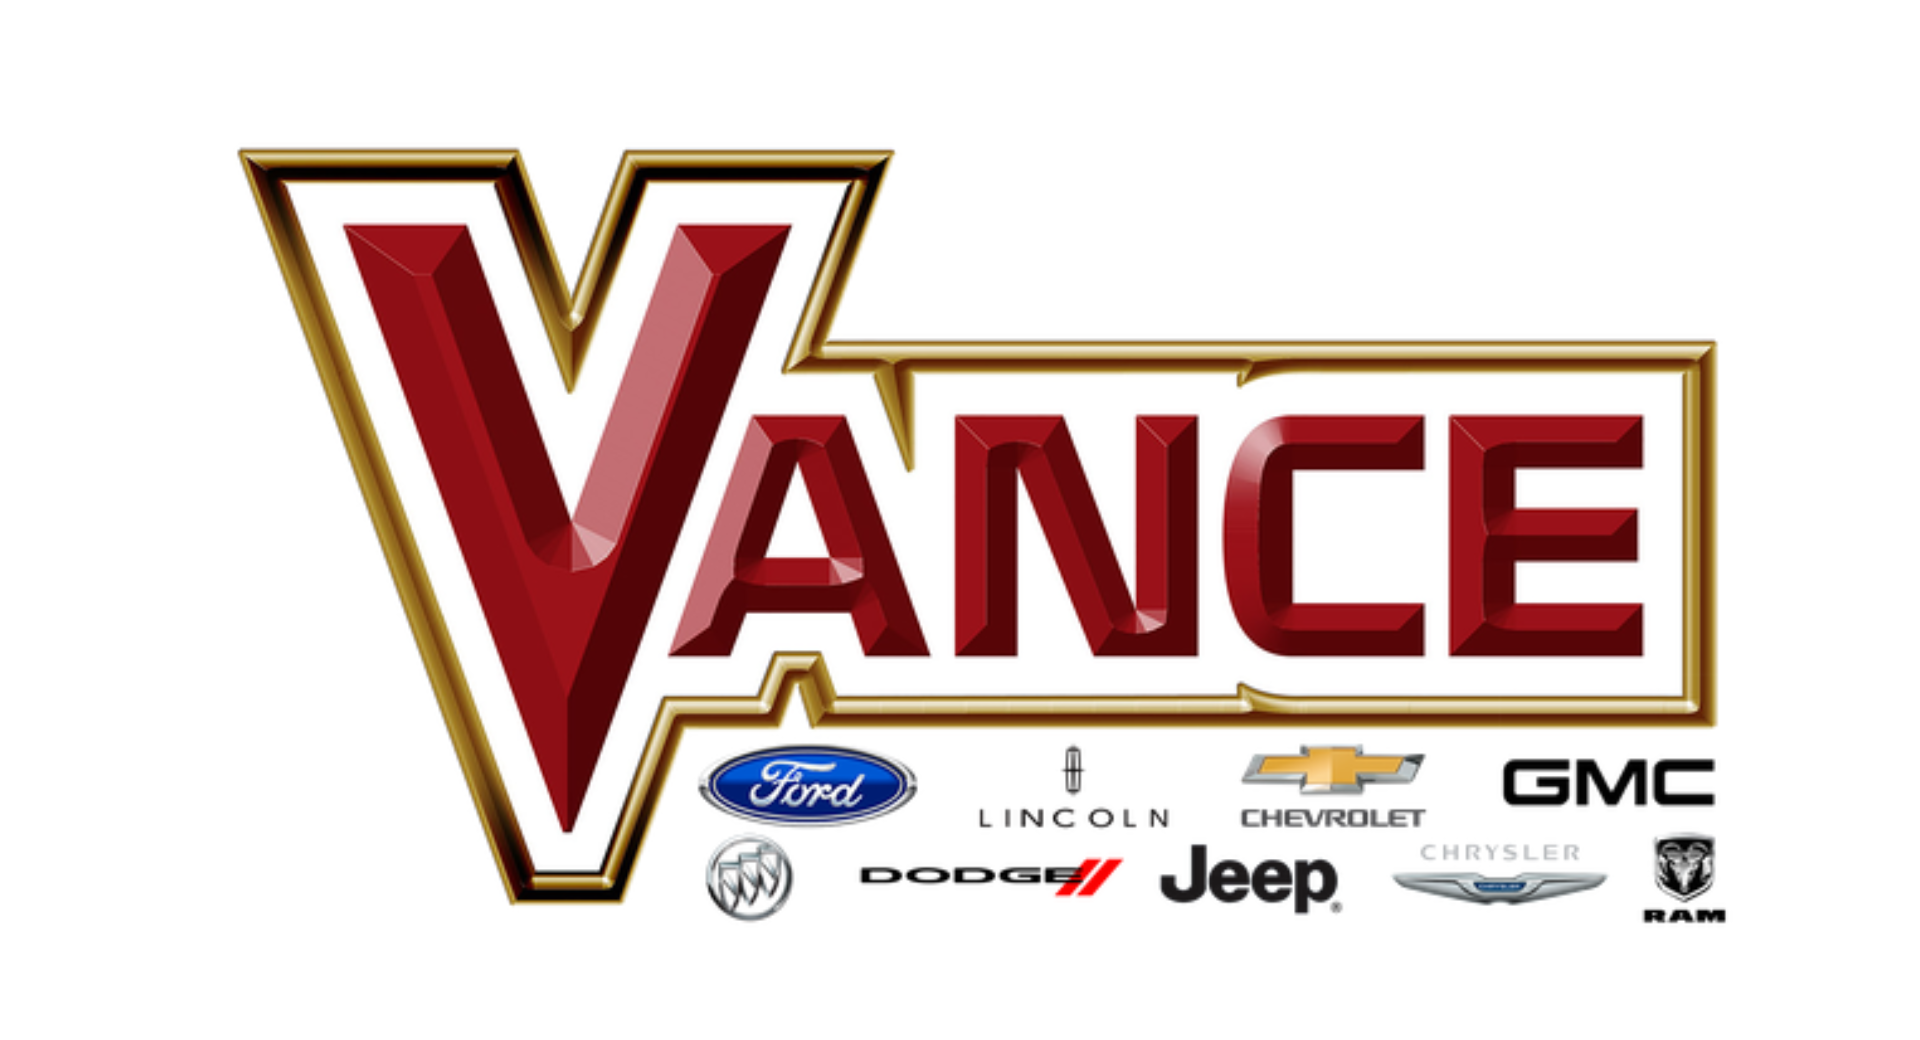 Vance Chevrolet Buick GMC is a Certified Agriculture Dealership